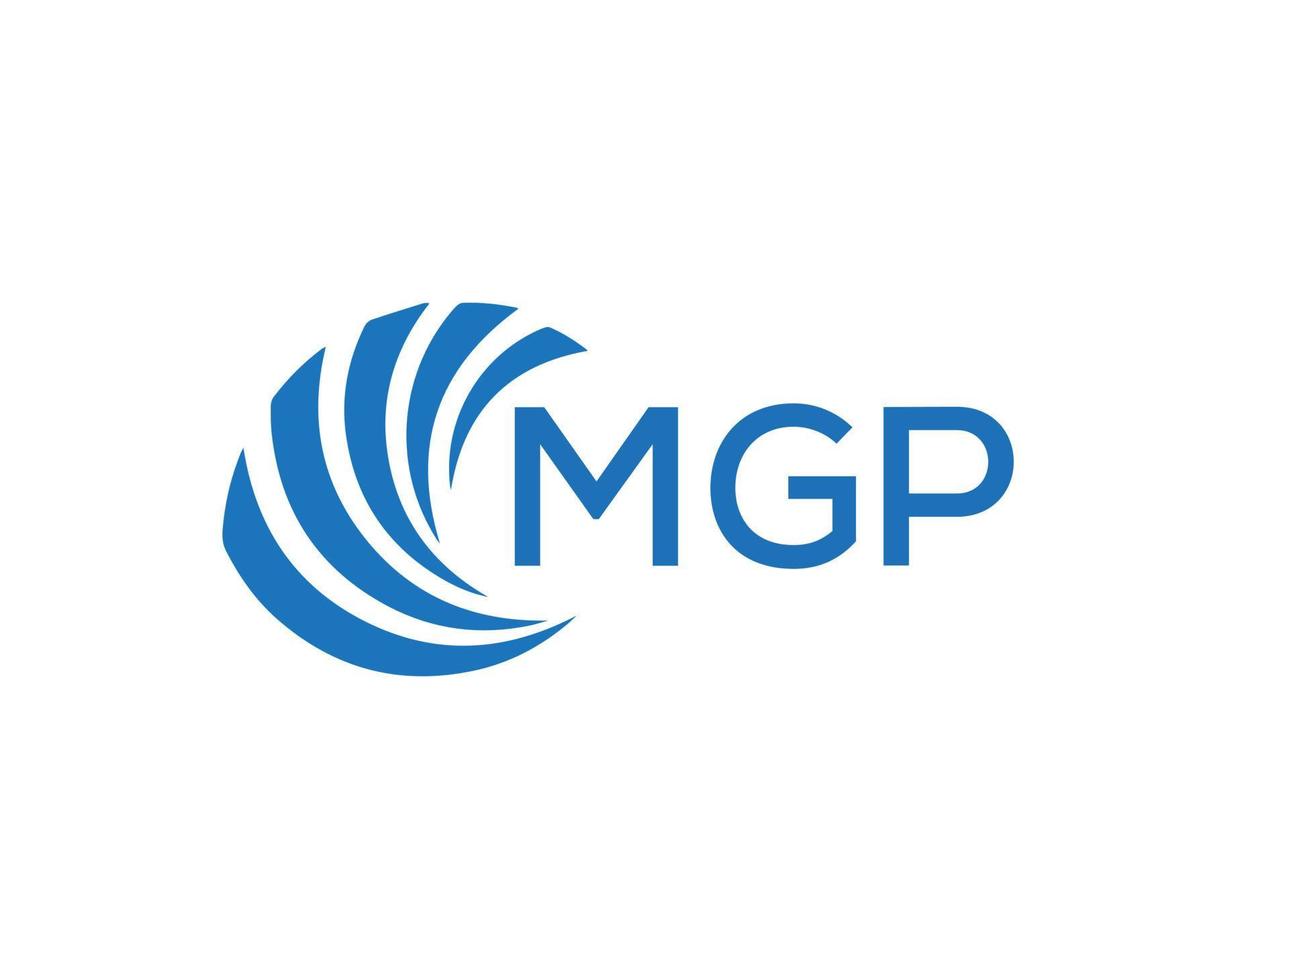 MGP abstract business growth logo design on white background. MGP creative initials letter logo concept. vector